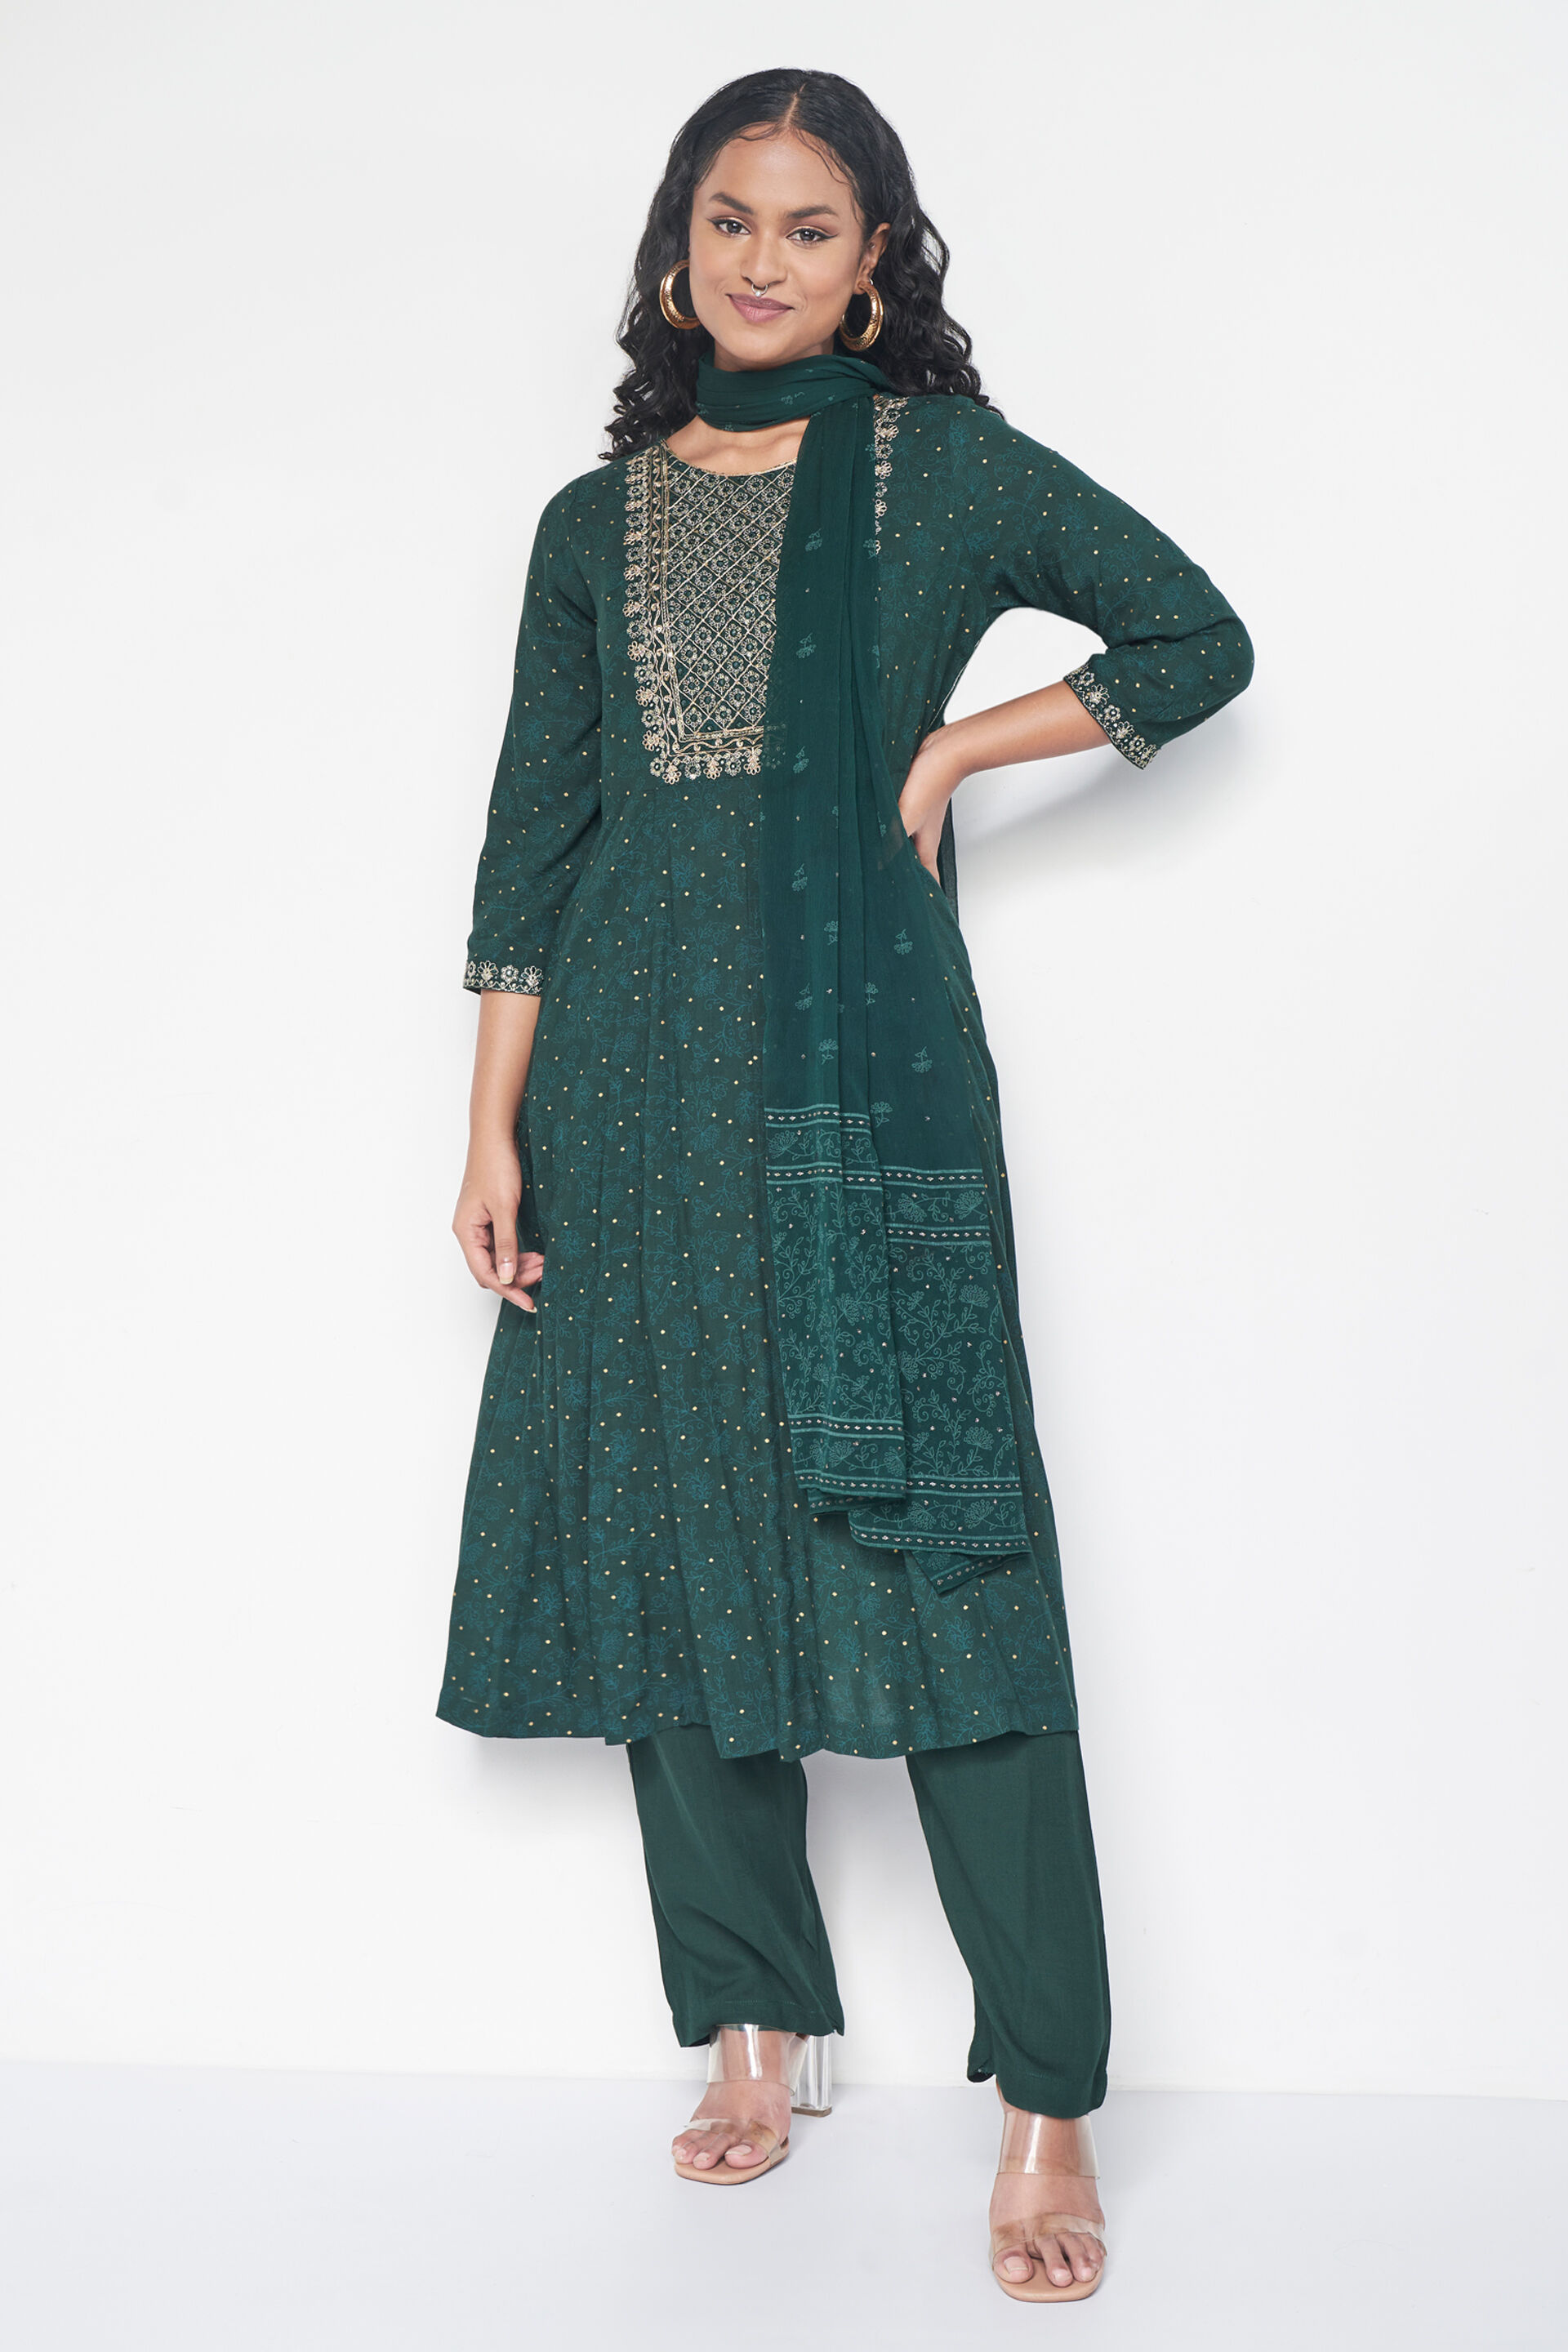 Buy Poshvue Women's Embroidered Straight Georgette Regular Relaxed Woven  Light Weight Casual Wear Kurti Set (G_K_537_Green_X-Large) at Amazon.in